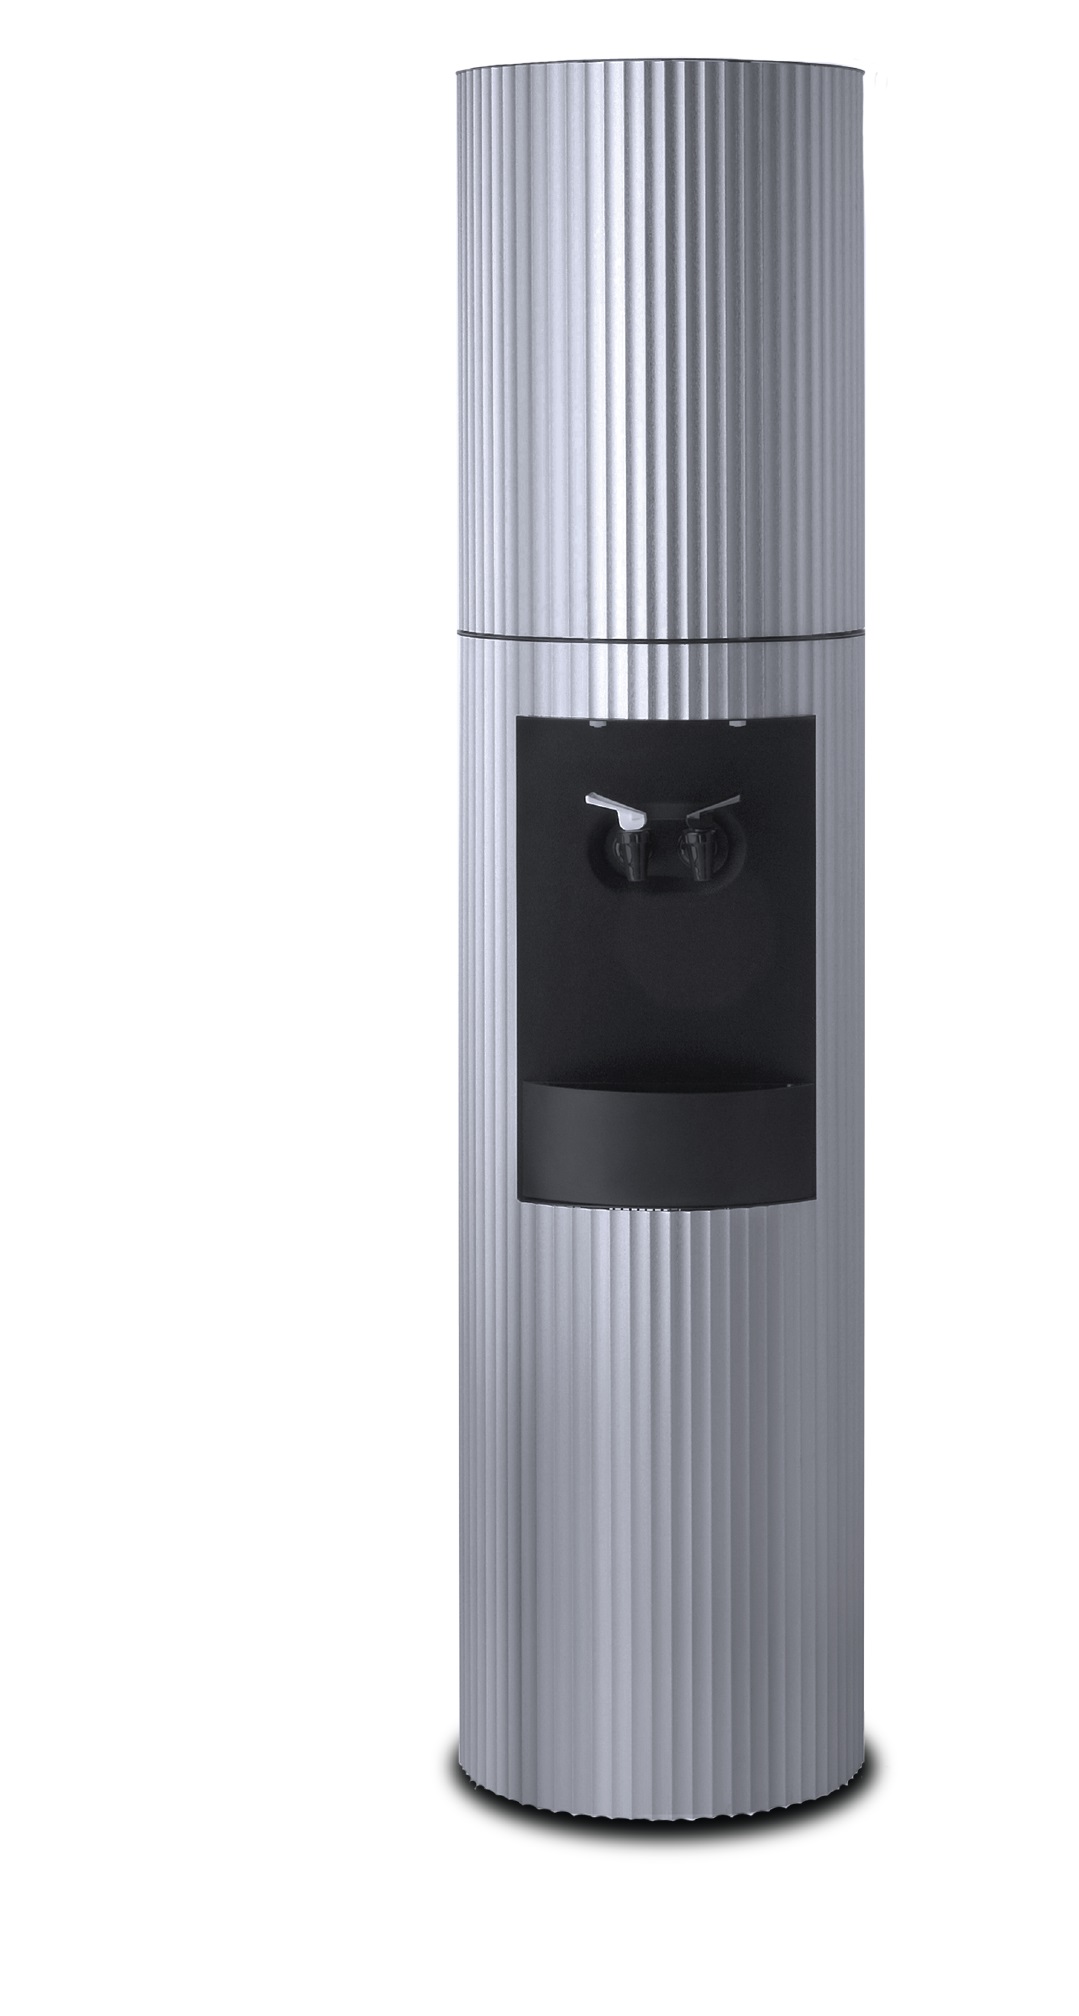 Celsius Bottleless Water Cooler in Fluted Aluminum with Brushed Finish - Cold/Cold